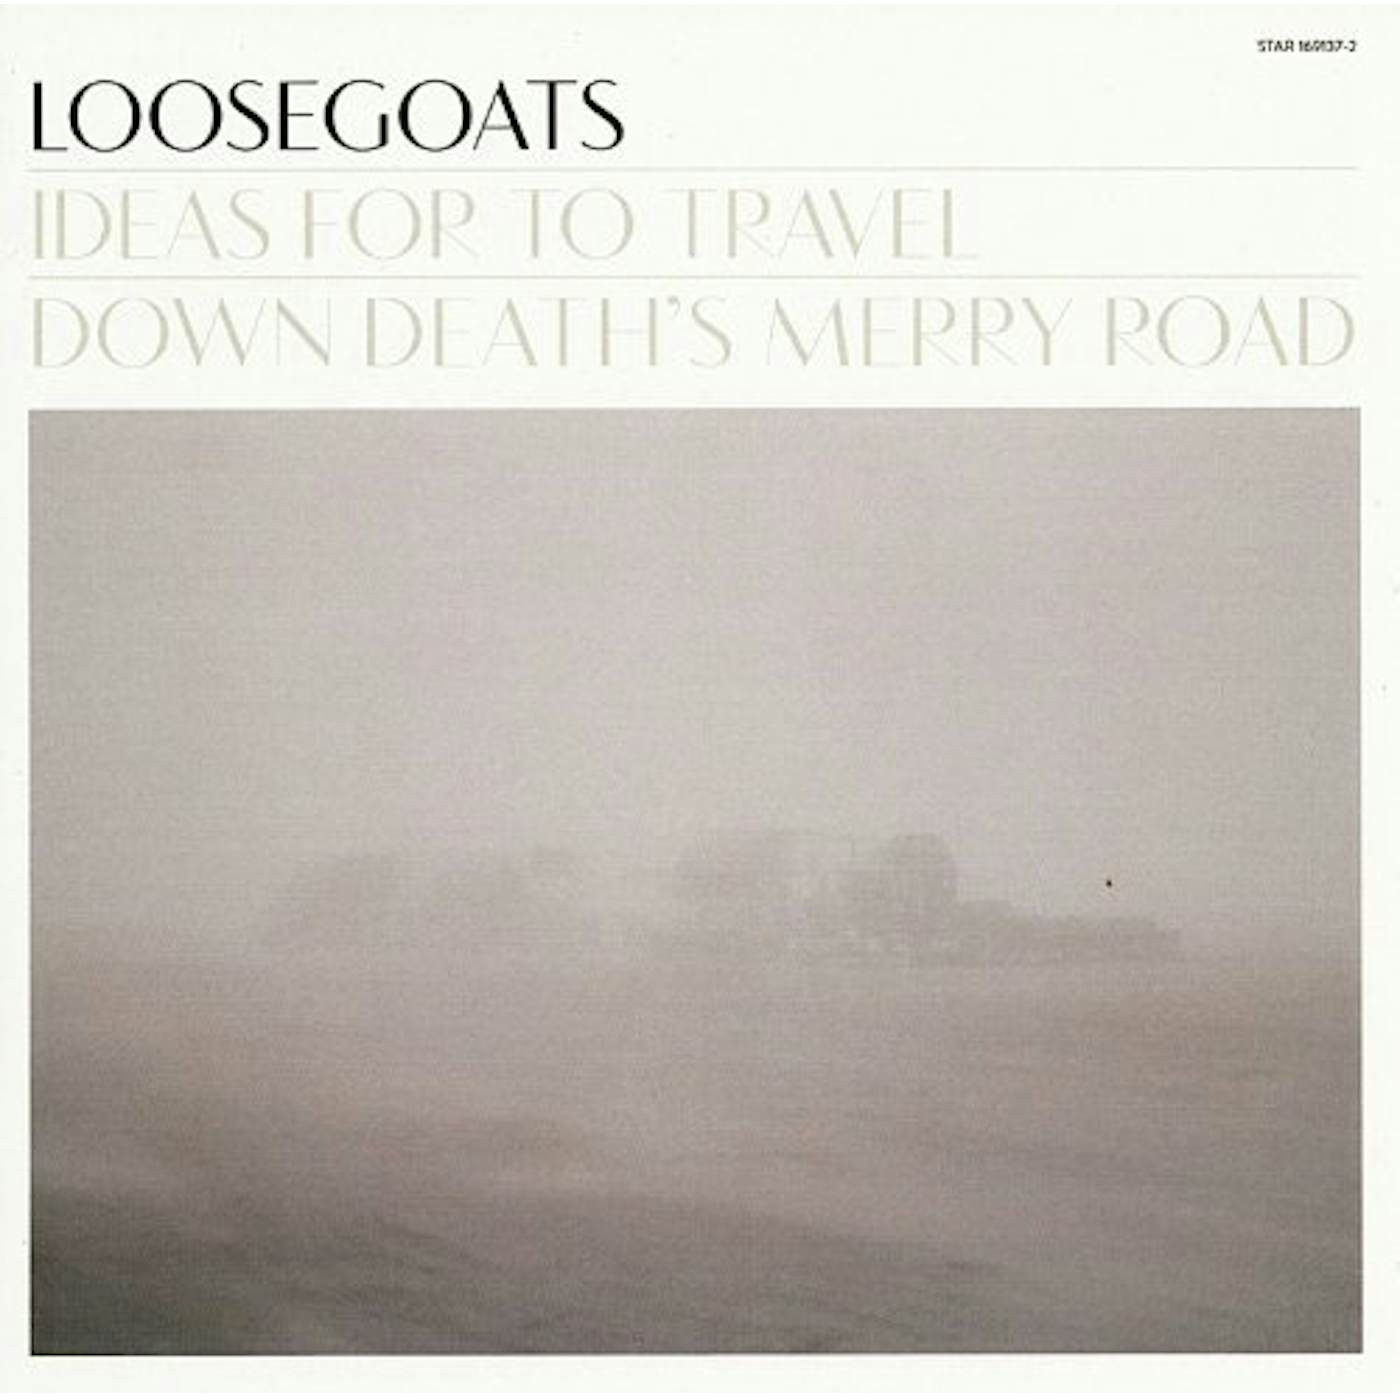 Loosegoats Ideas for to travel down death's merry road Vinyl Record